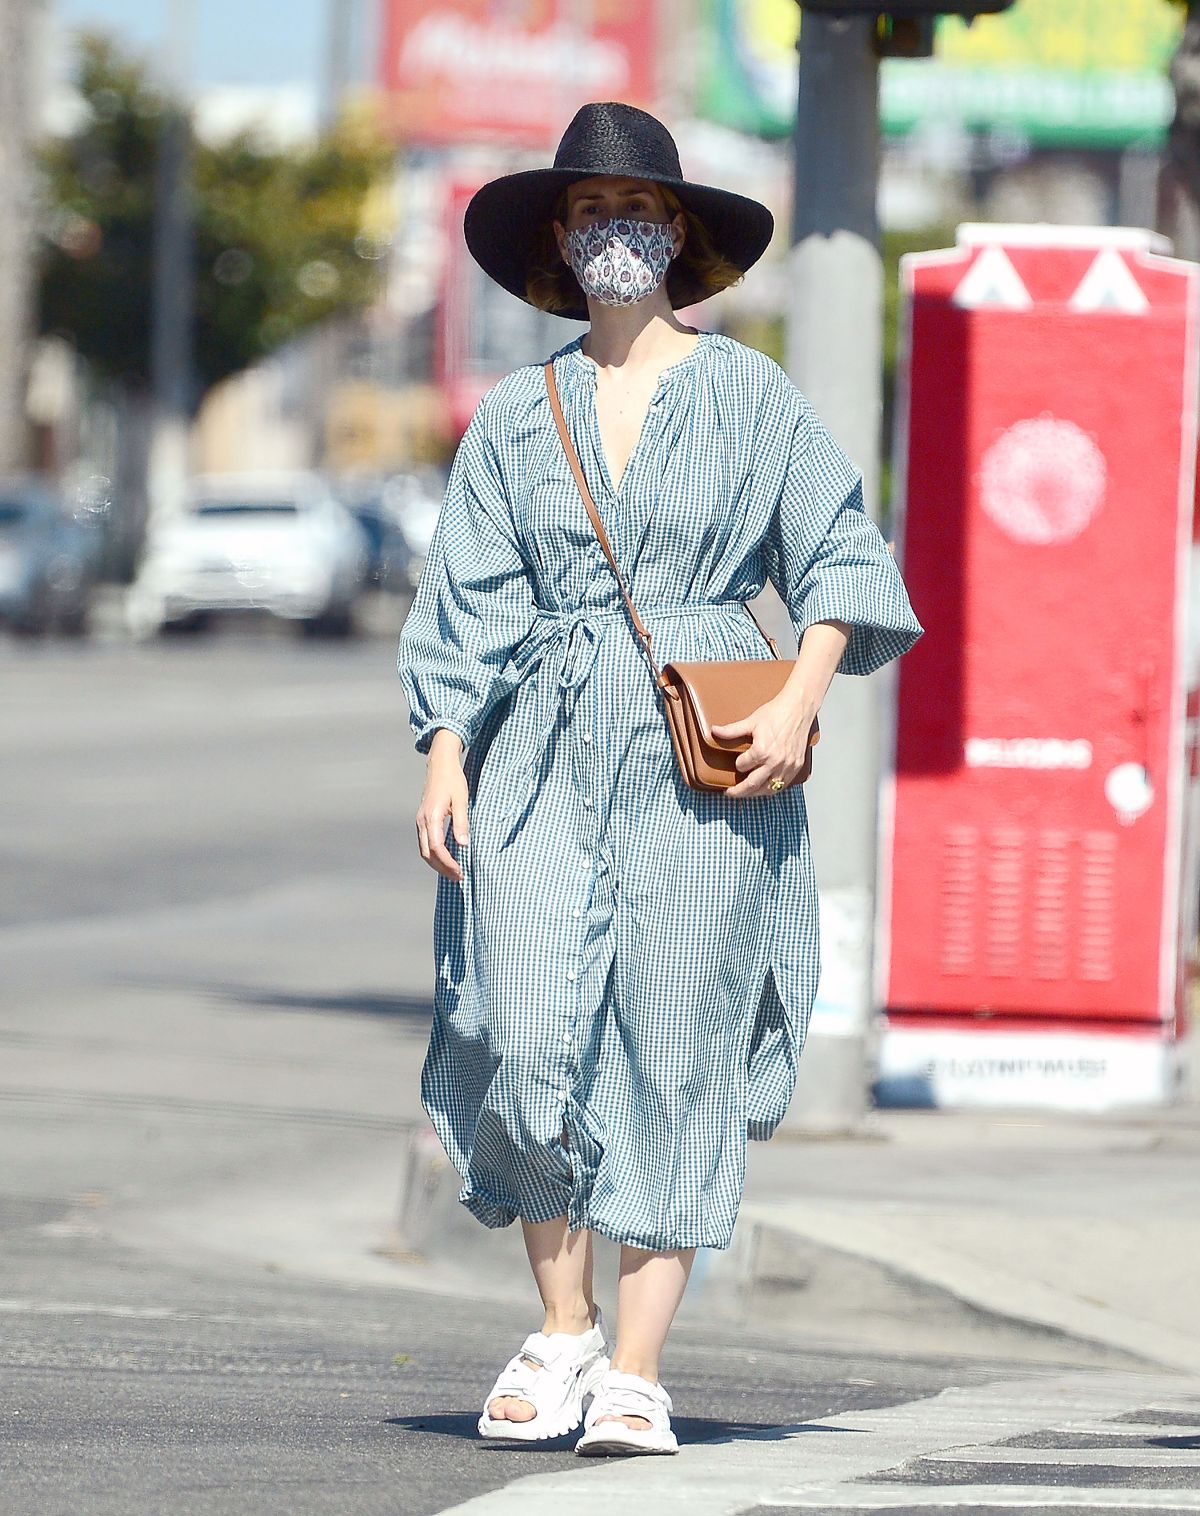 sarah-paulson-out-shopping-in-los-angeles-07-30-2020-1.jpg